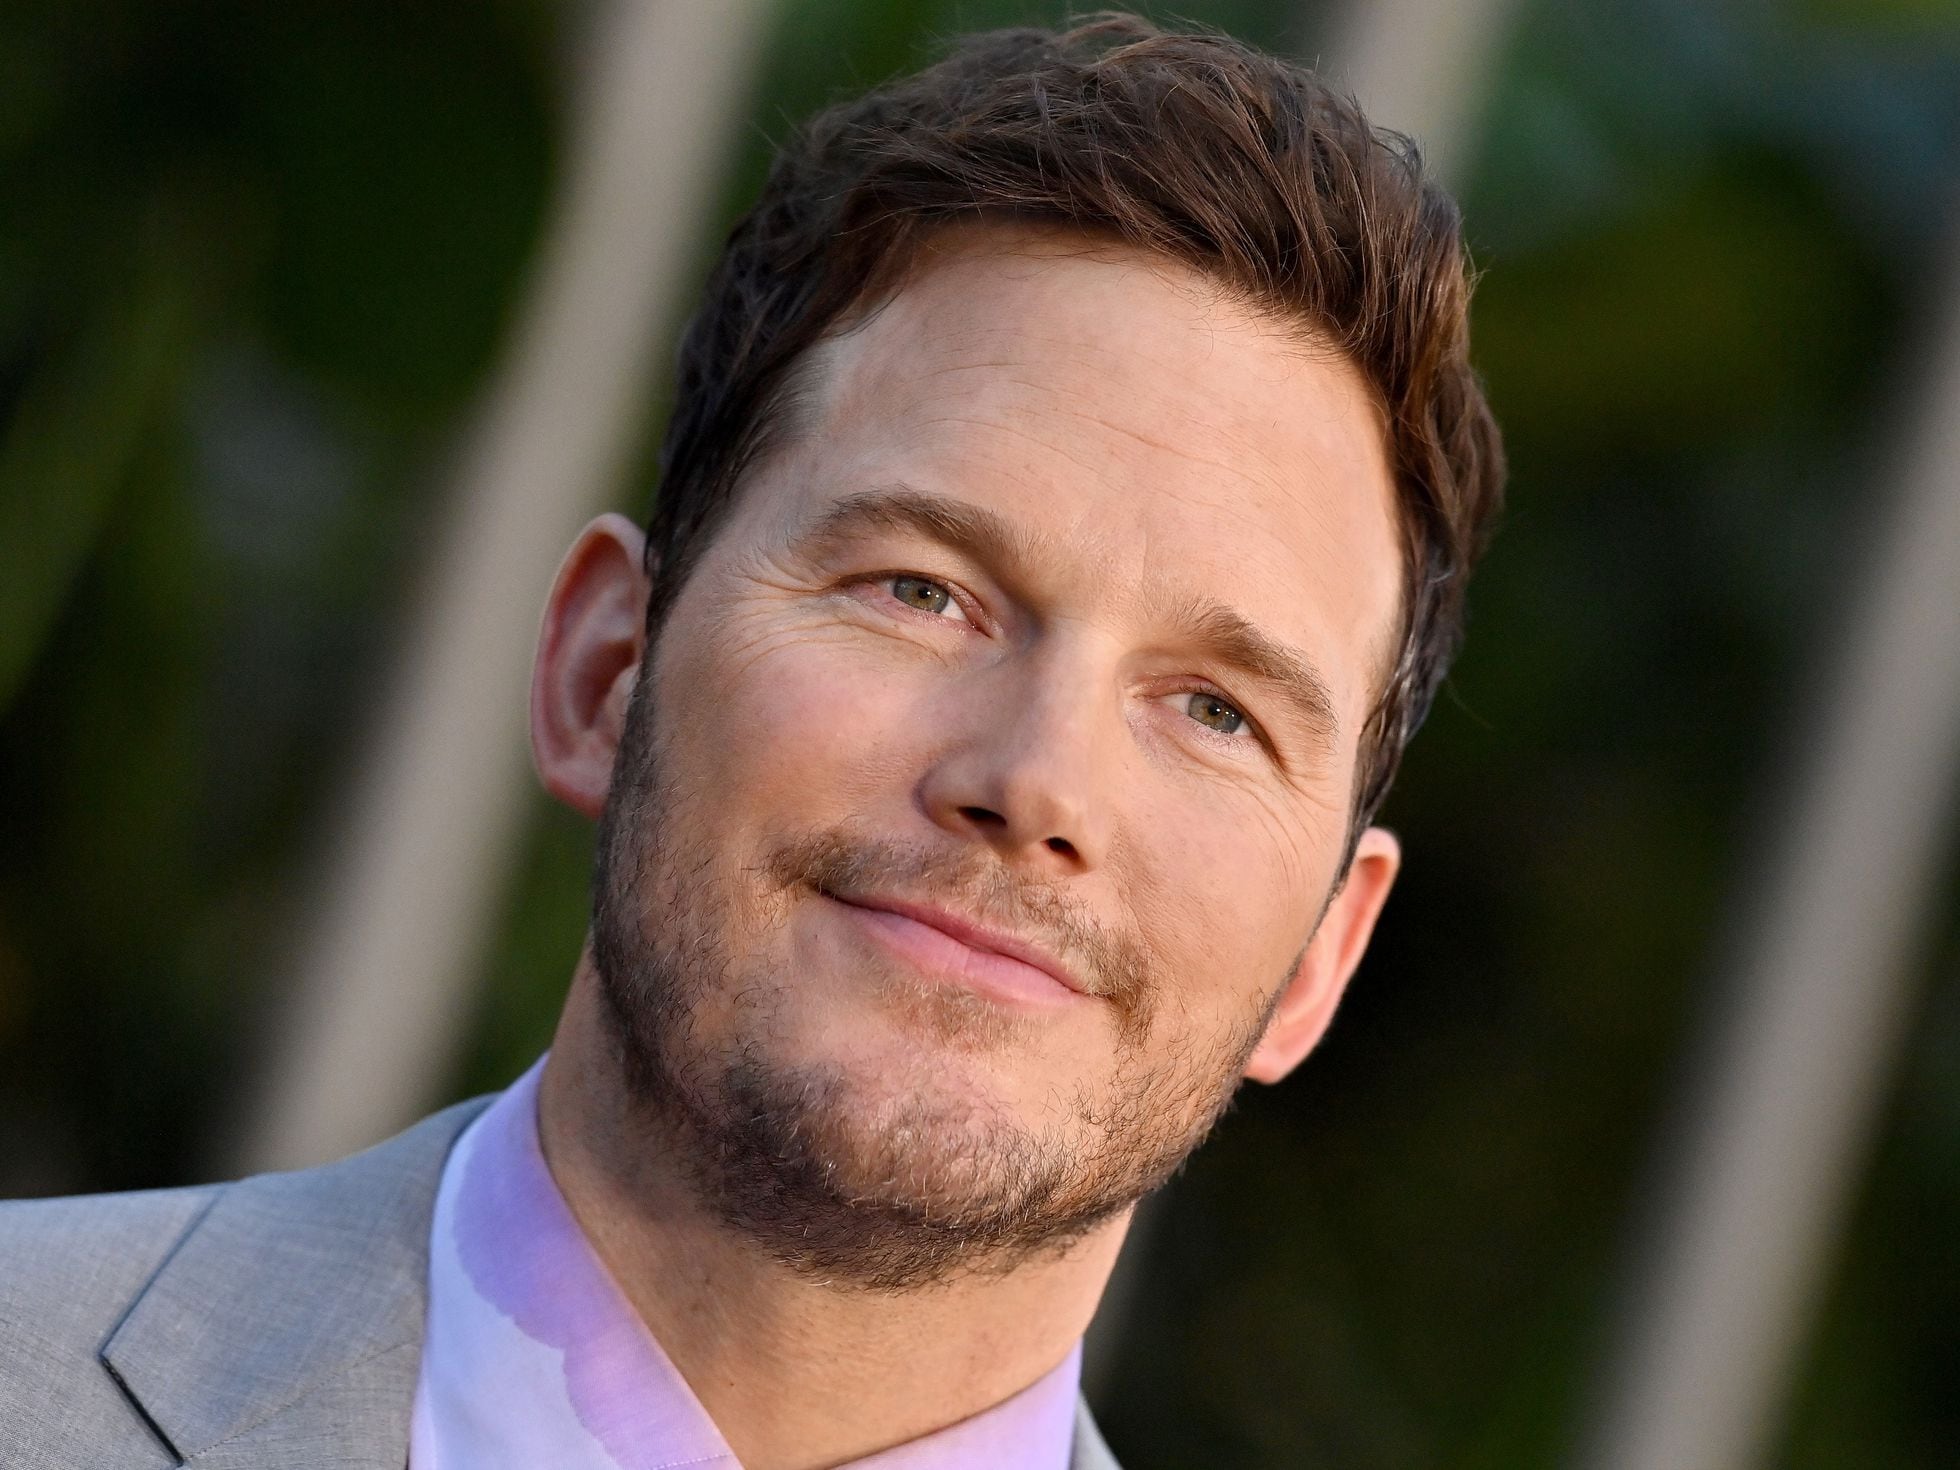 One has to go': How Chris Pratt became the least liked of all of  Hollywood's actors named Chris | Culture | EL PAÍS English